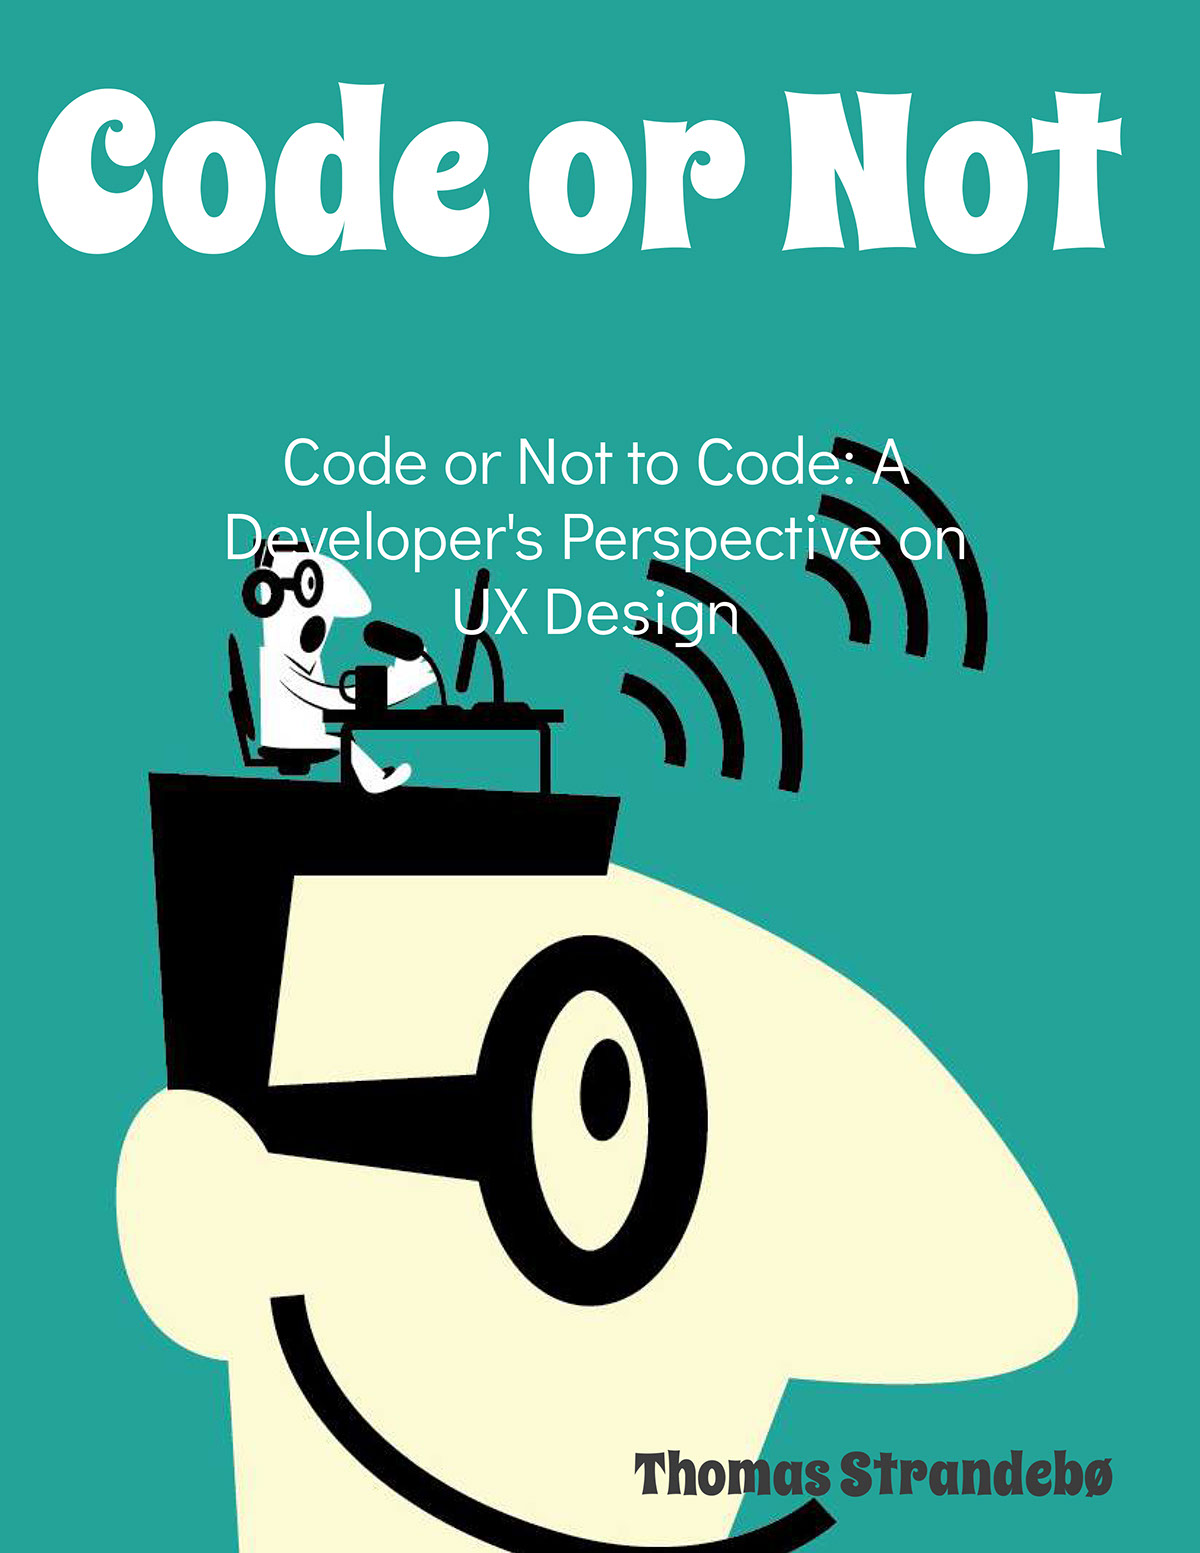 Code or Not rendition image